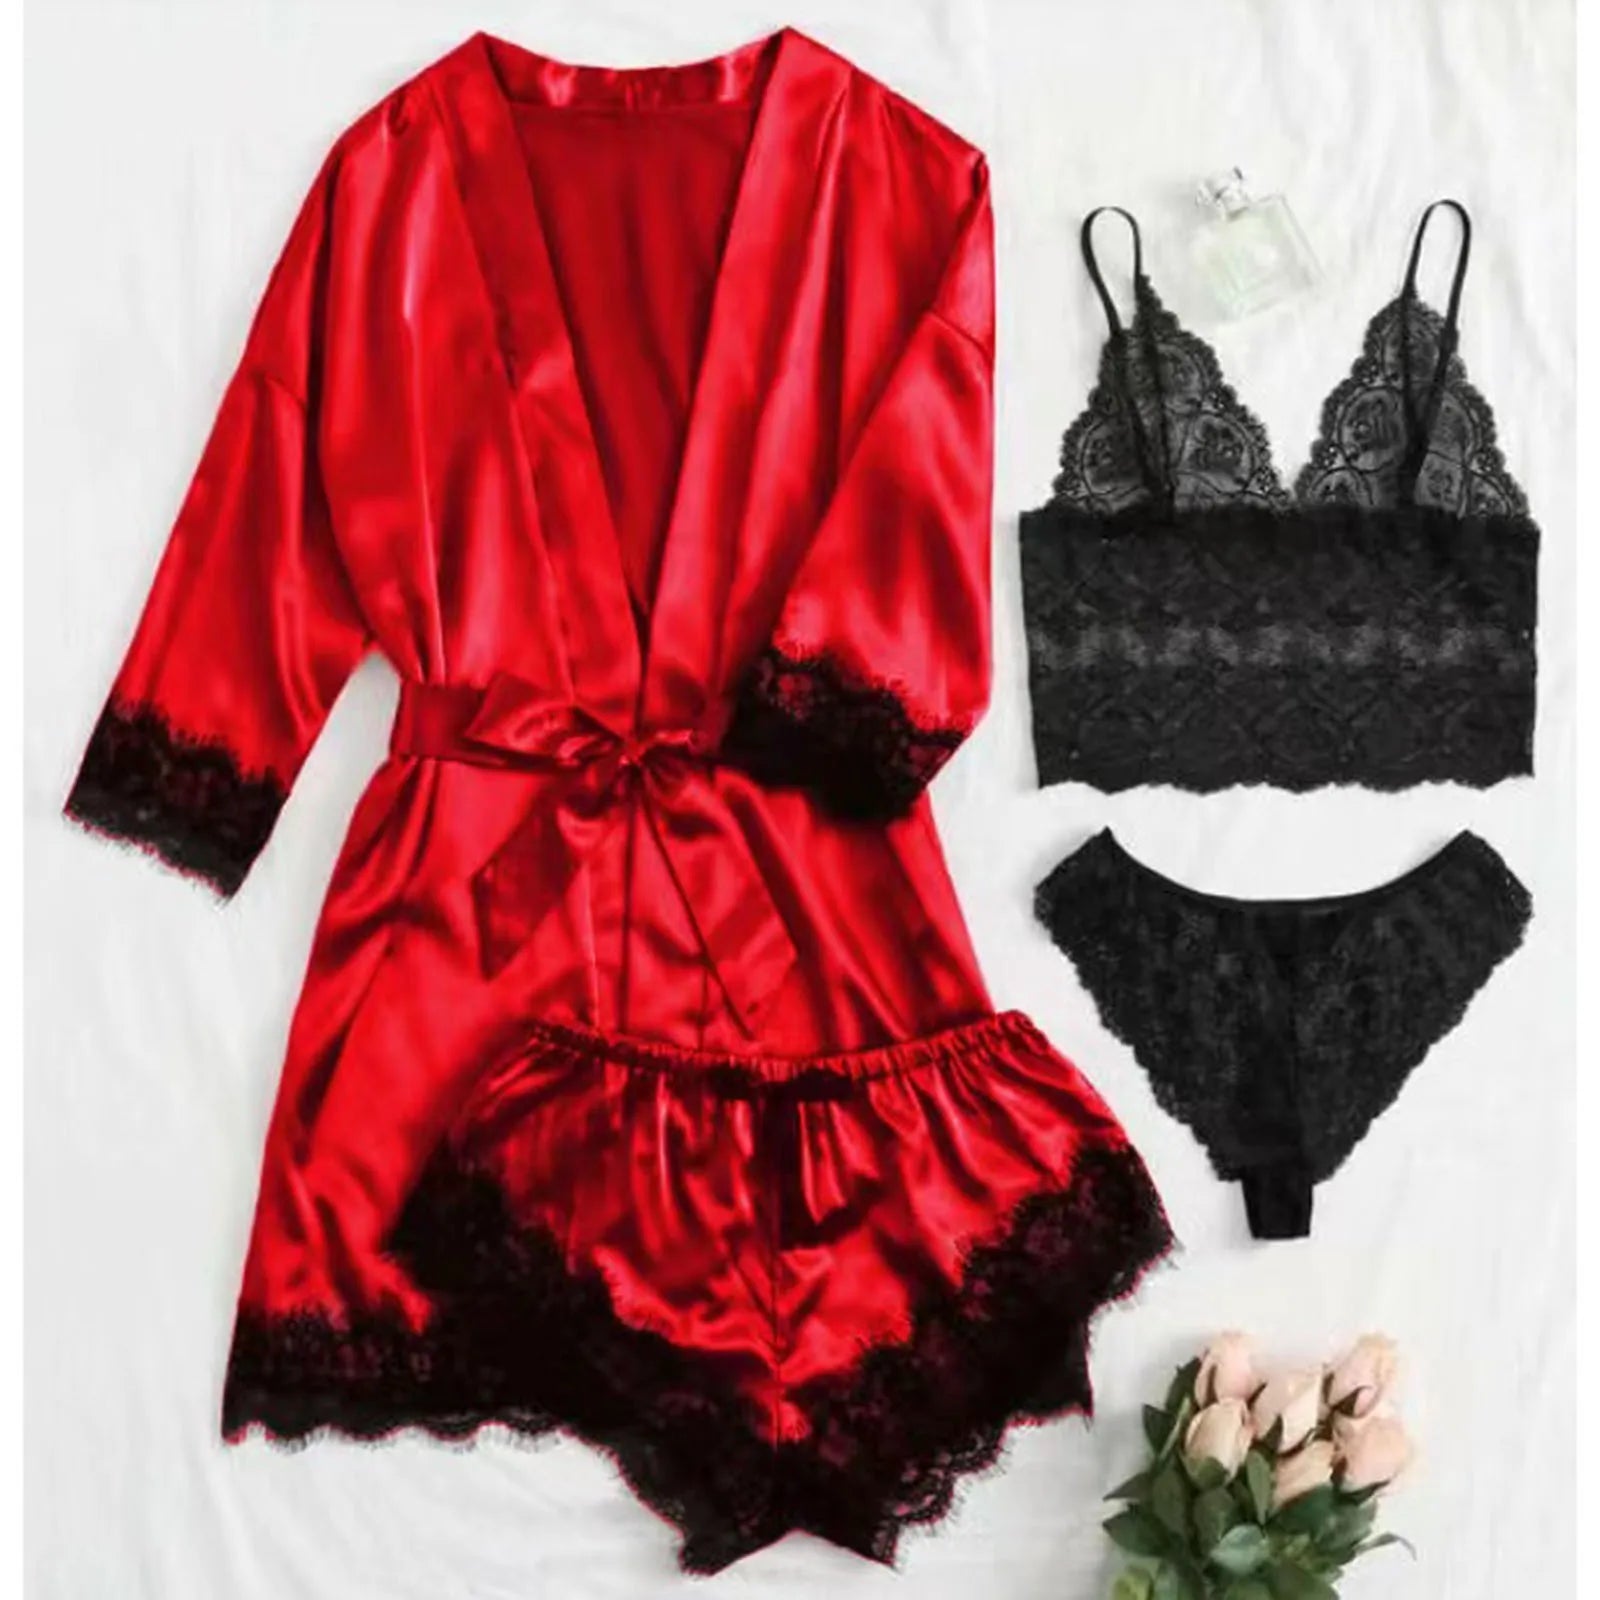 4-piece luxurious silk lingerie set with long red robe, lace trim, and matching black bralette and panties displayed on a white background with a bouquet of flowers.